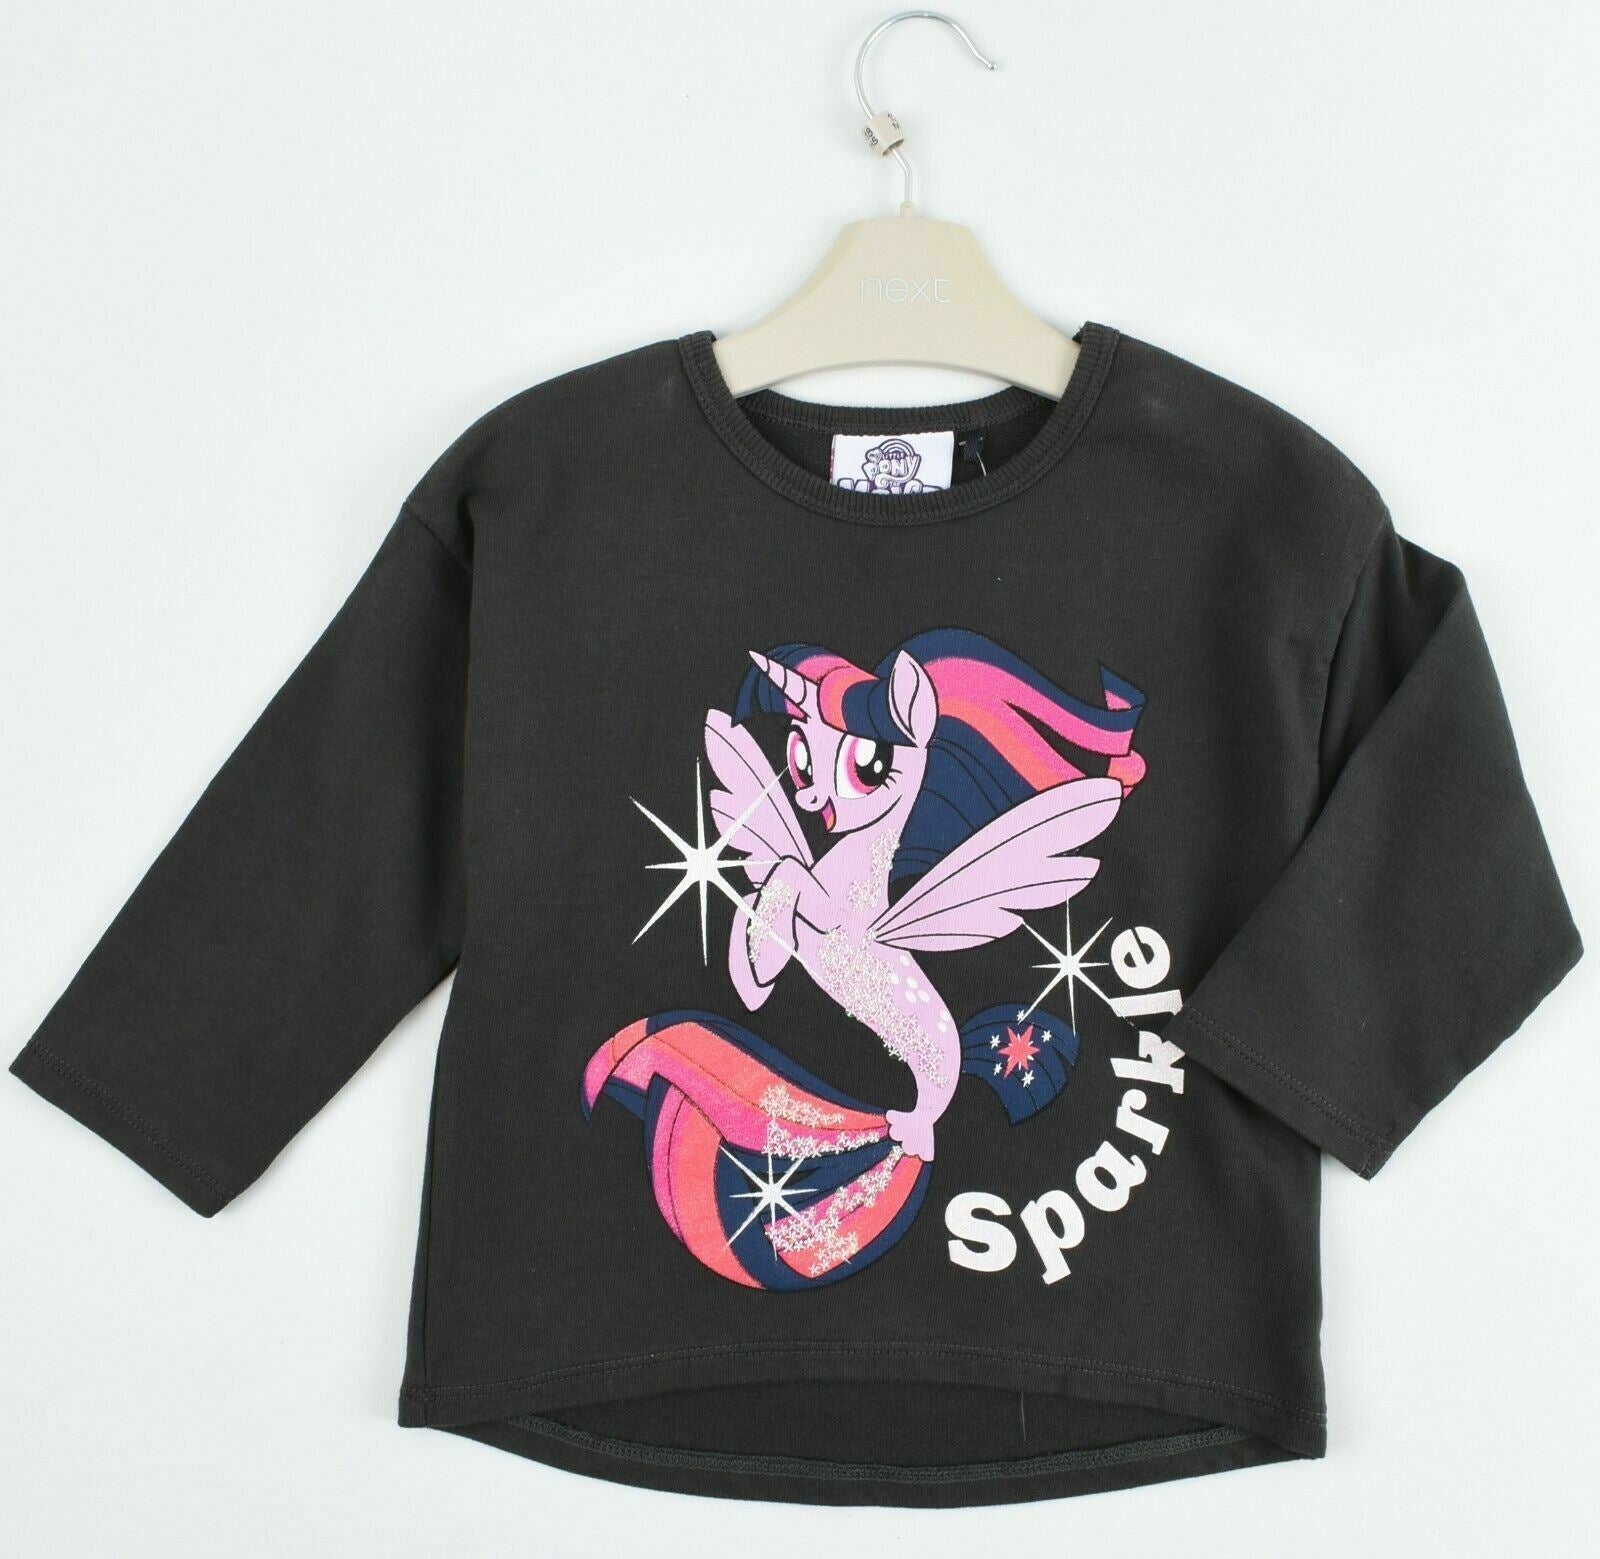 NEXT - MY LITTLE PONY Baby Girls Long Sleeve Top, Grey/Pink, 12 m to 18 months